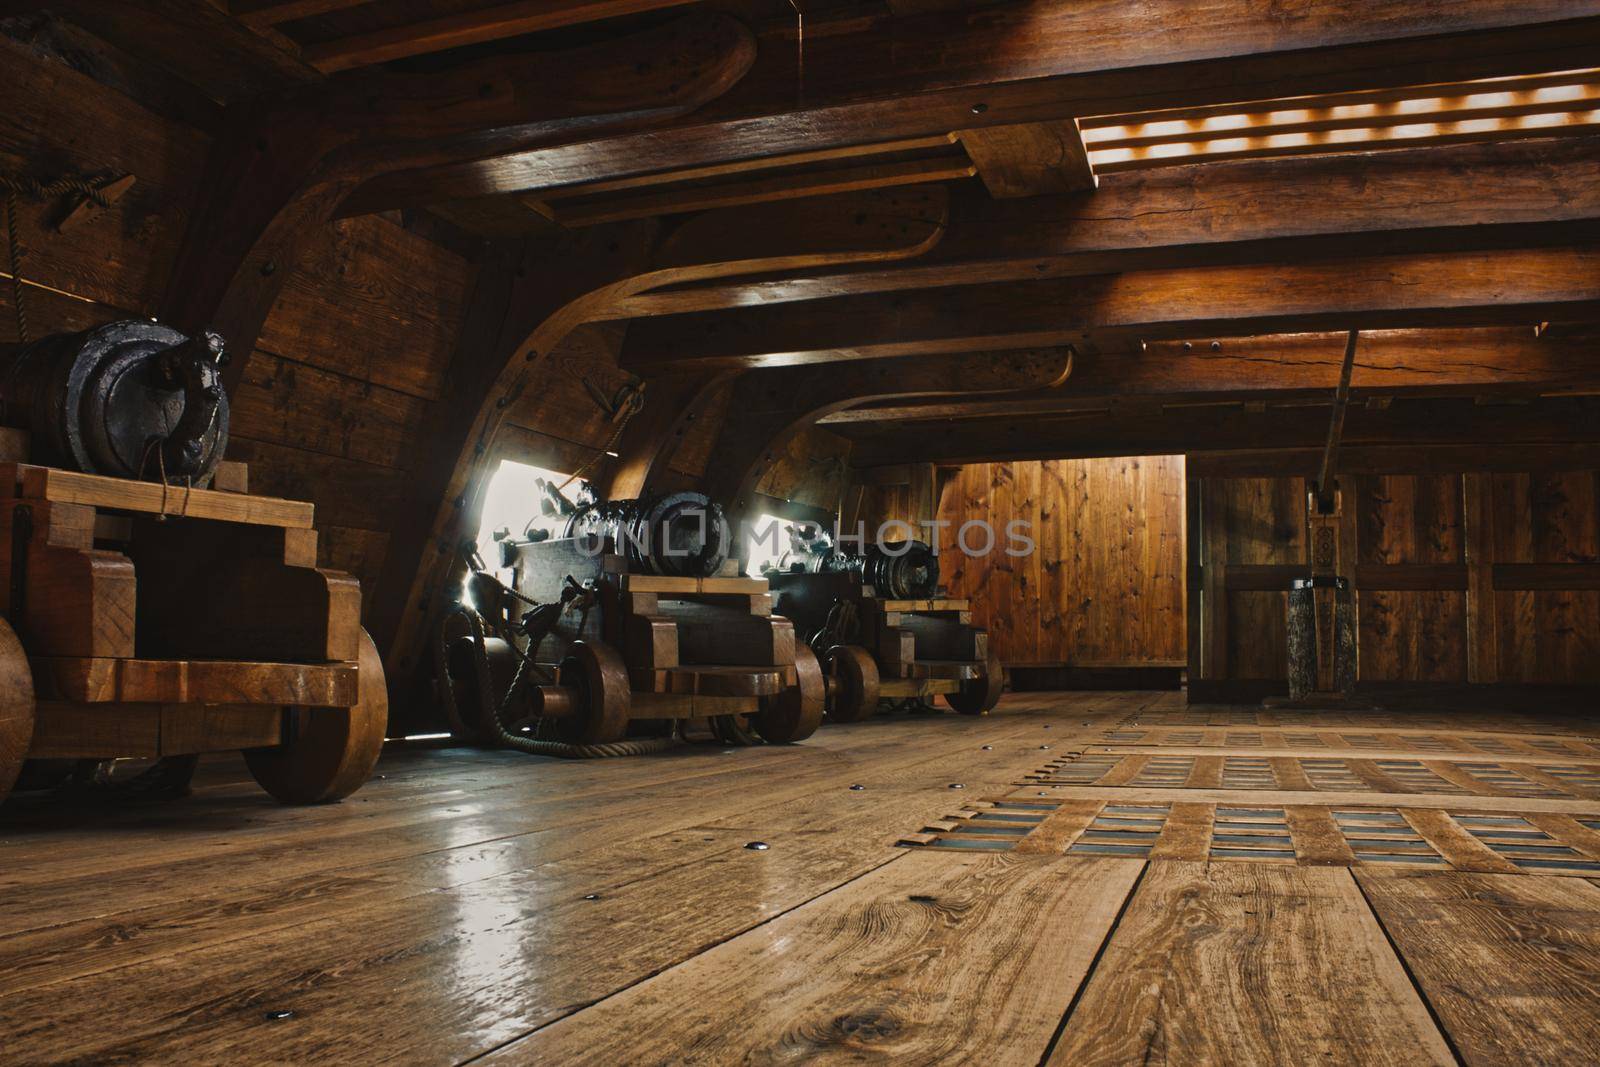 Stockholm, Sweden - February 22 2019: Interior of a gun deck on a historic warship with cannons